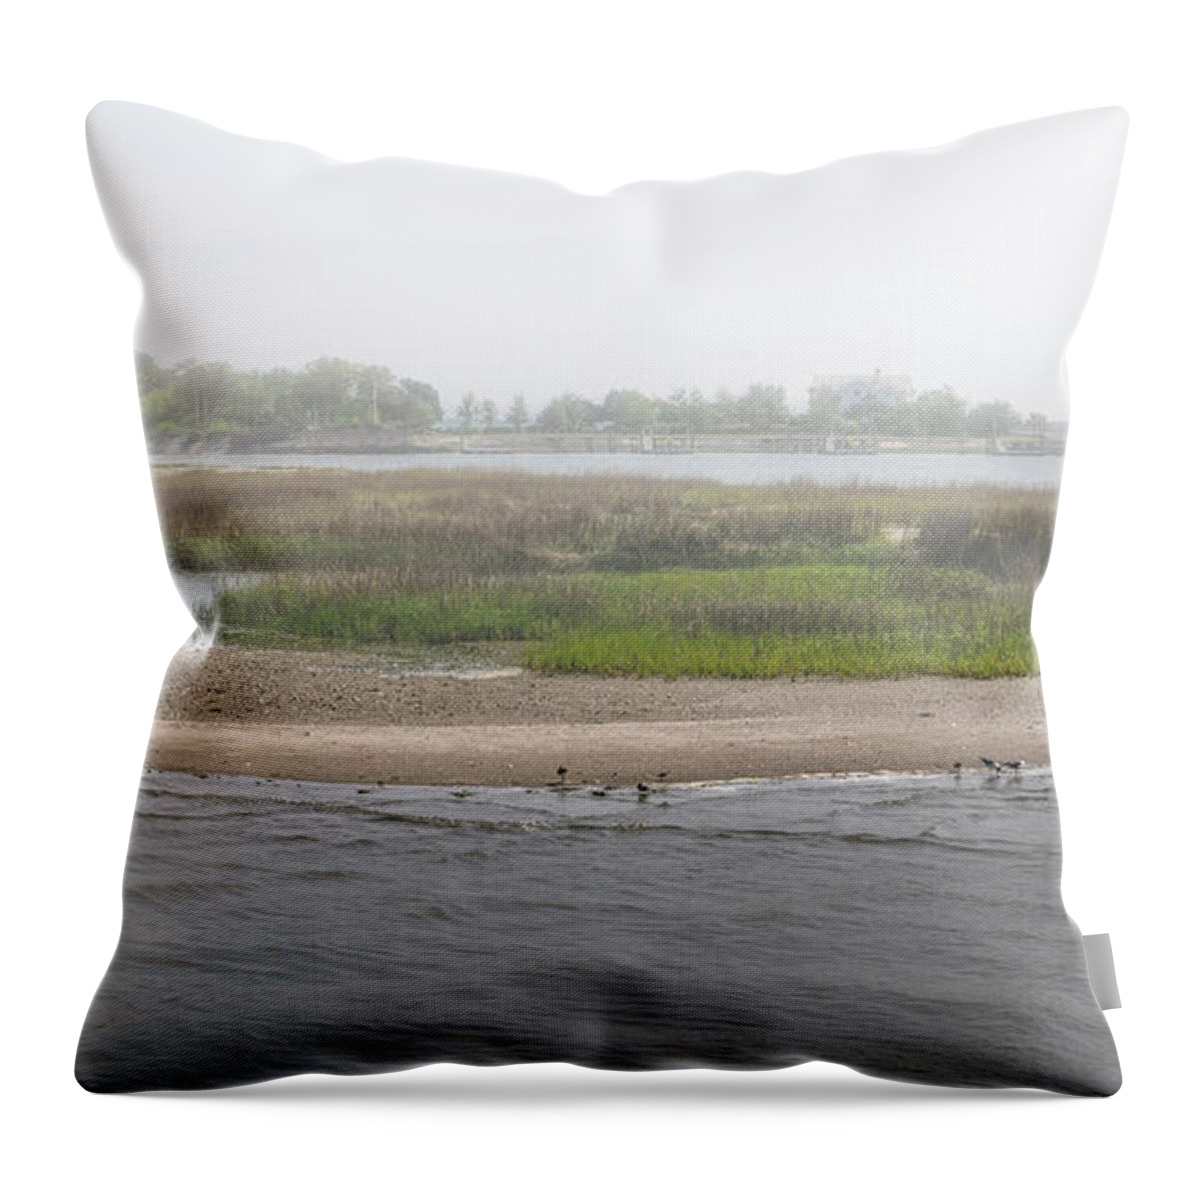 Fog Throw Pillow featuring the photograph Sullivan's Island Sleepy Southern Town by Dale Powell